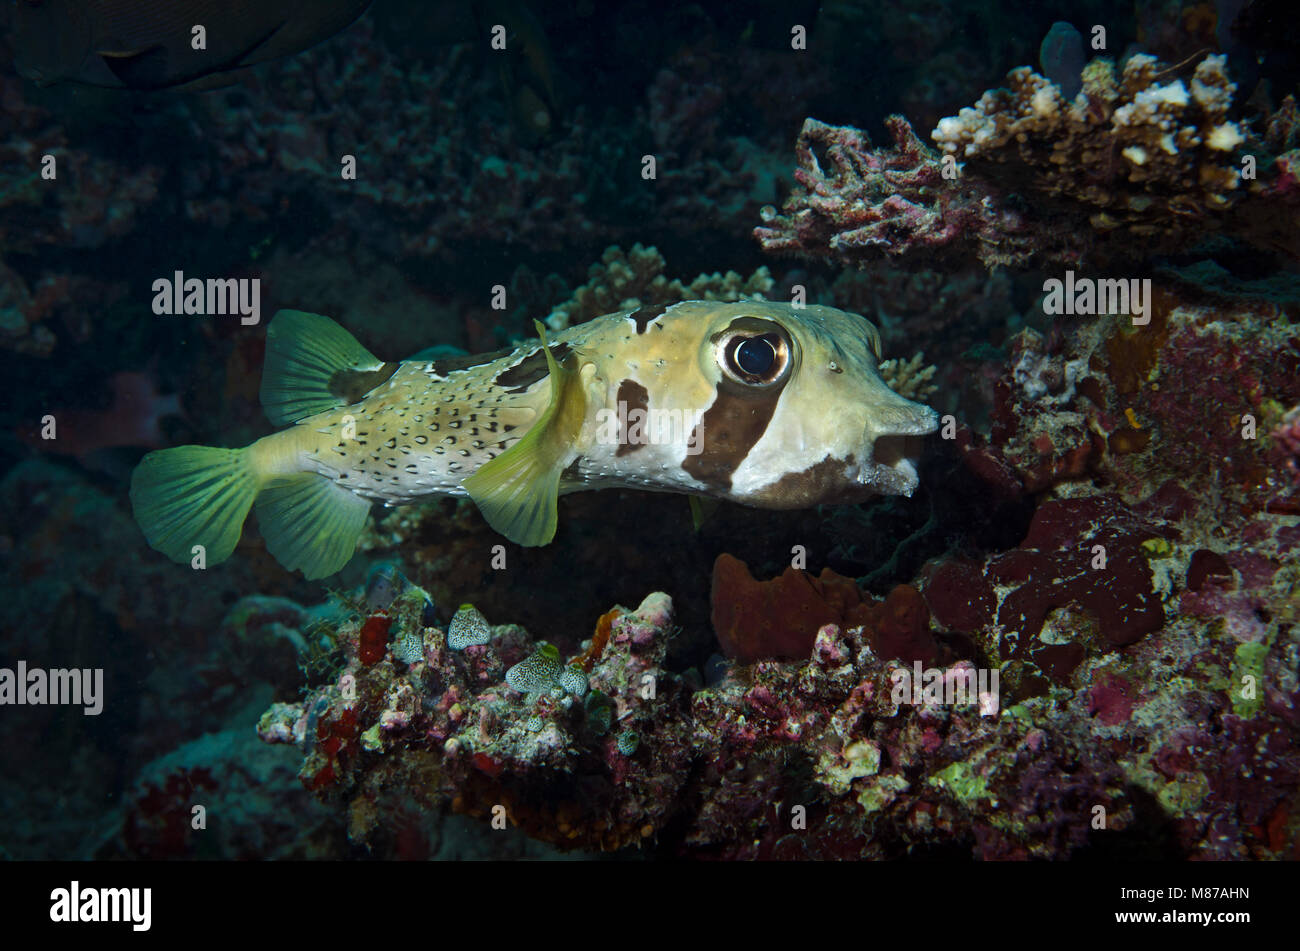 Blotched Porcupinefish, Diodon liturosus, with cleaner wrasse, Labroides dimidiatus, on coral reef in Bathala, Maldives, Stock Photo